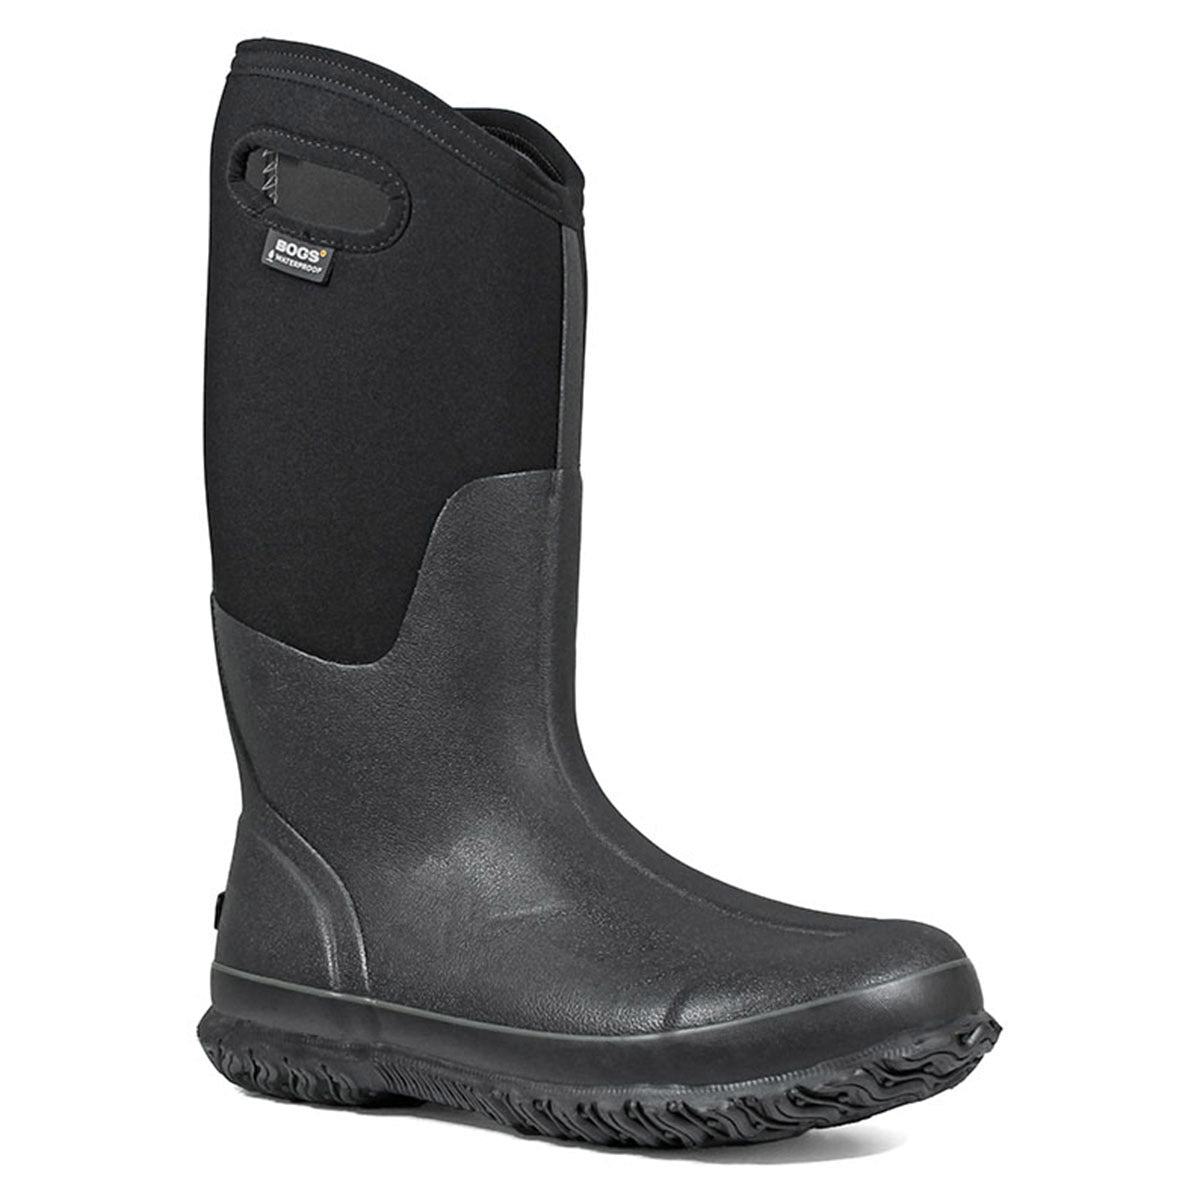 Bogs Classic Tall Black - Women&#39;s waterproof boot with neoprene shaft and rubber outsole.